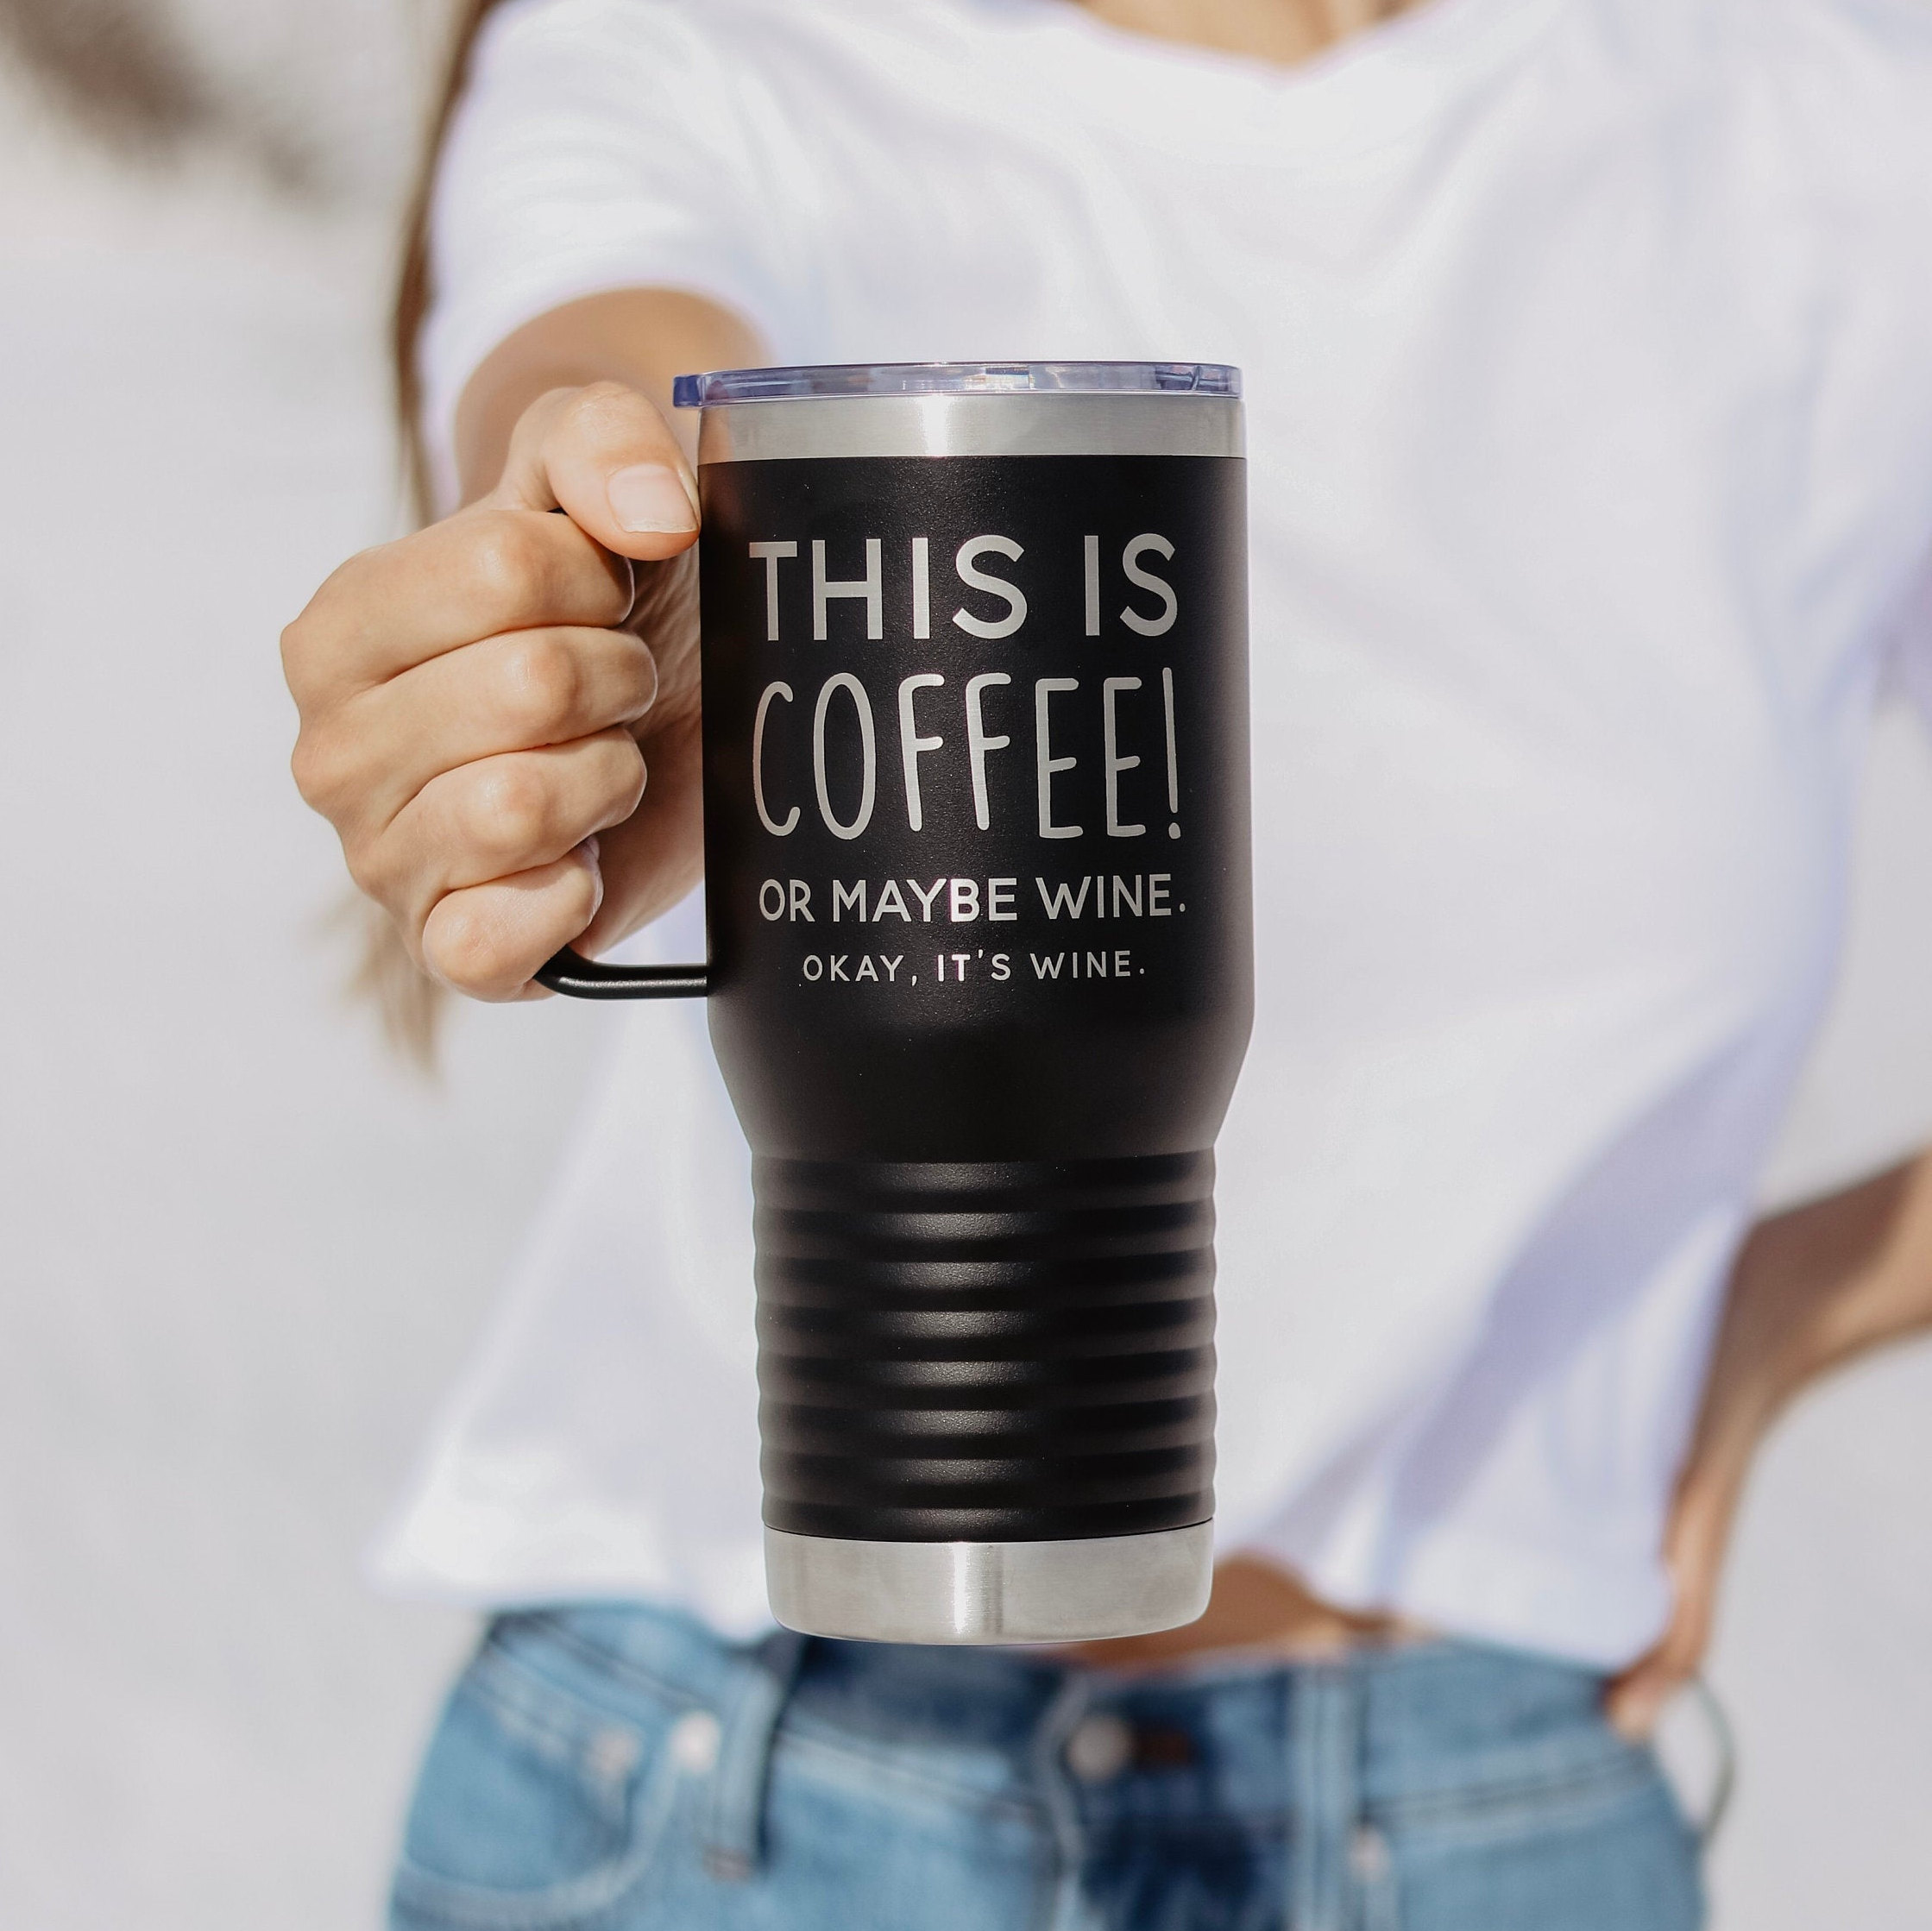 https://3cetching.com/wp-content/uploads/2021/07/this-is-coffee-or-maybe-wine-engraved-stainless-steel-tumbler-vacuum-insulated-wine-mug-funny-mug-60f76b6b.jpg